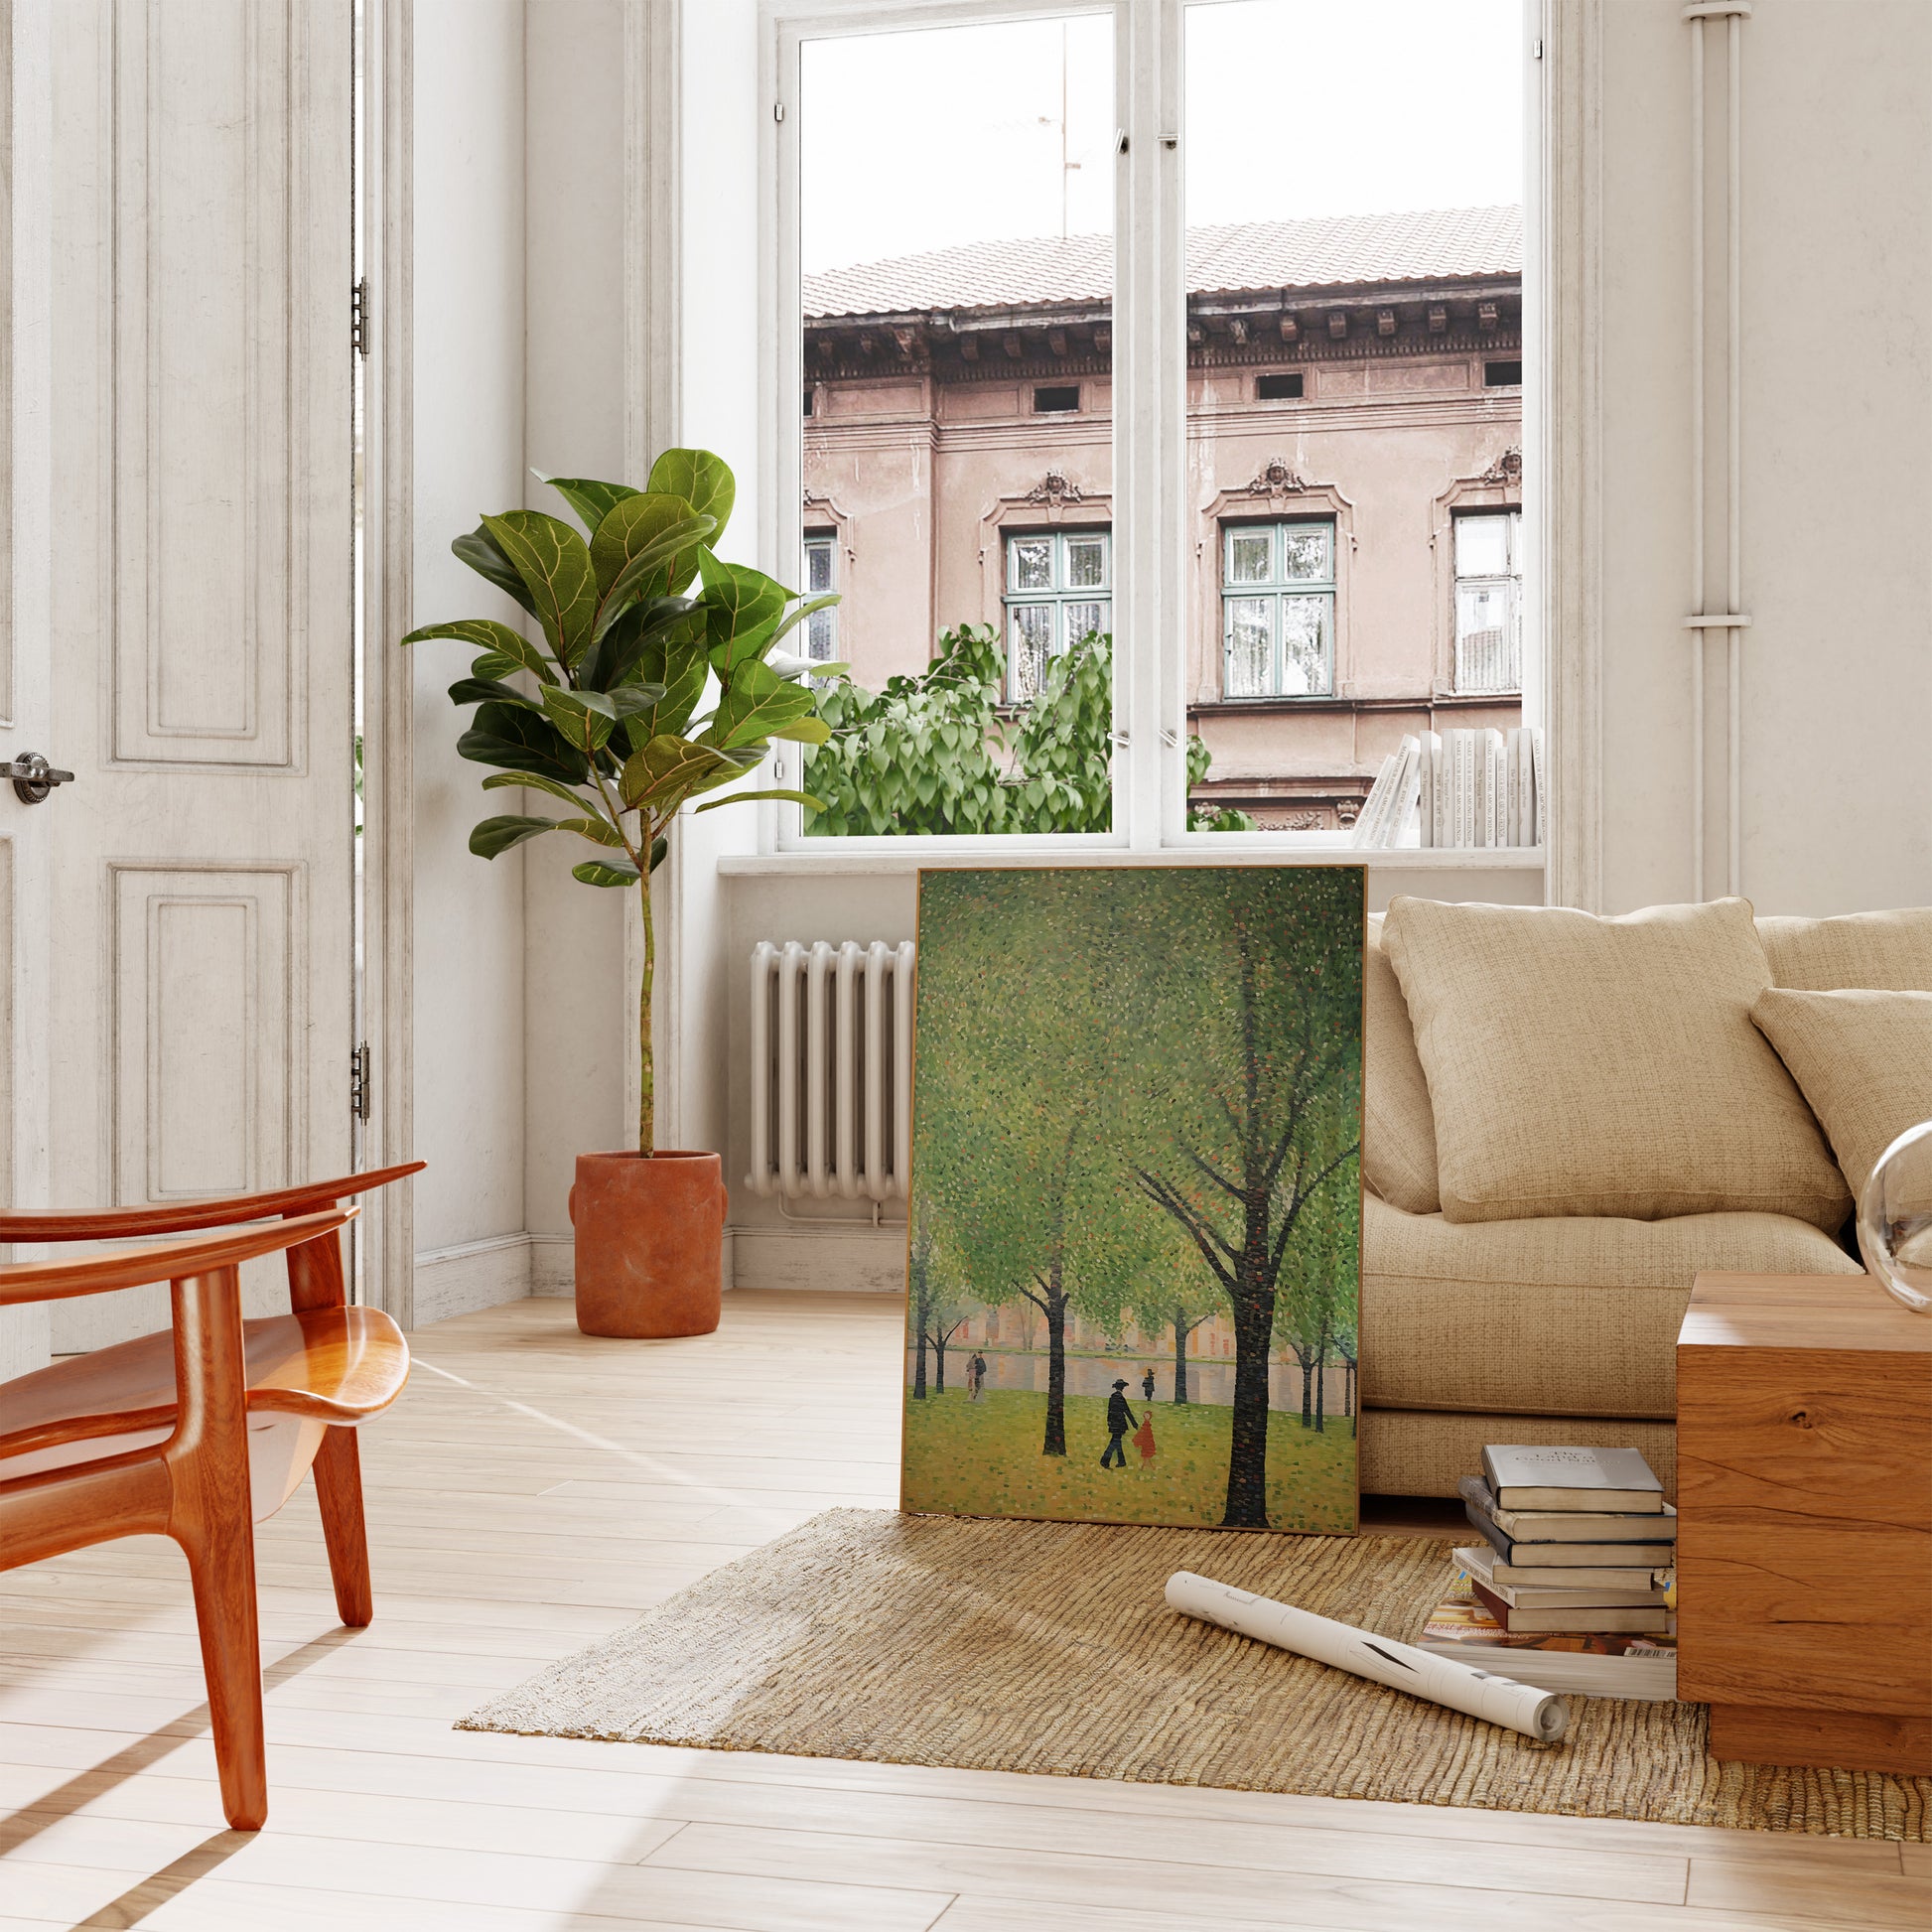 A cozy living room with a sofa, wooden table, potted plant, and a painting leaning against the wall.